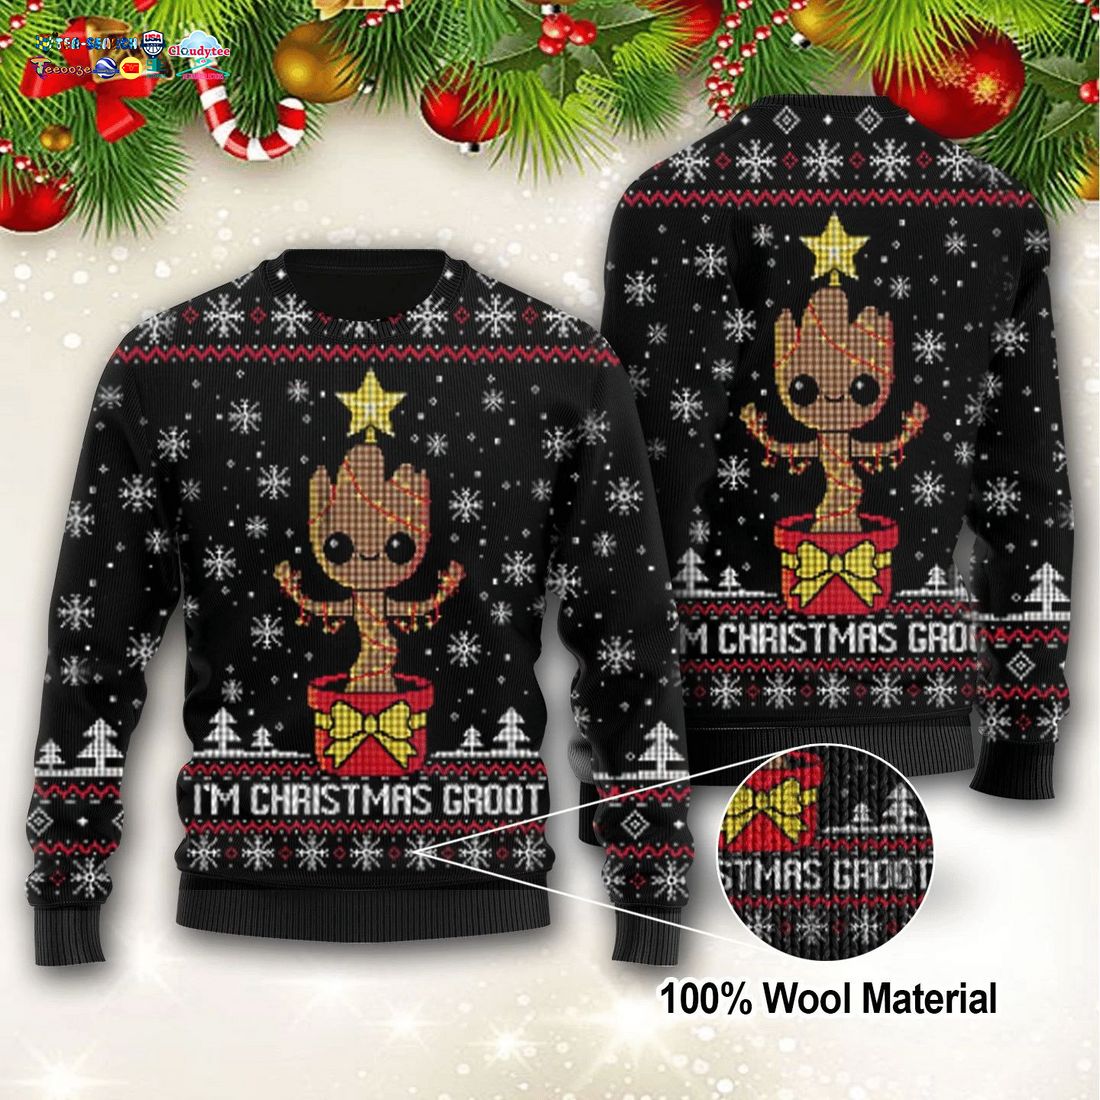 I'm Christmas Groot Ugly Christmas Sweater - Radiant and glowing Pic dear